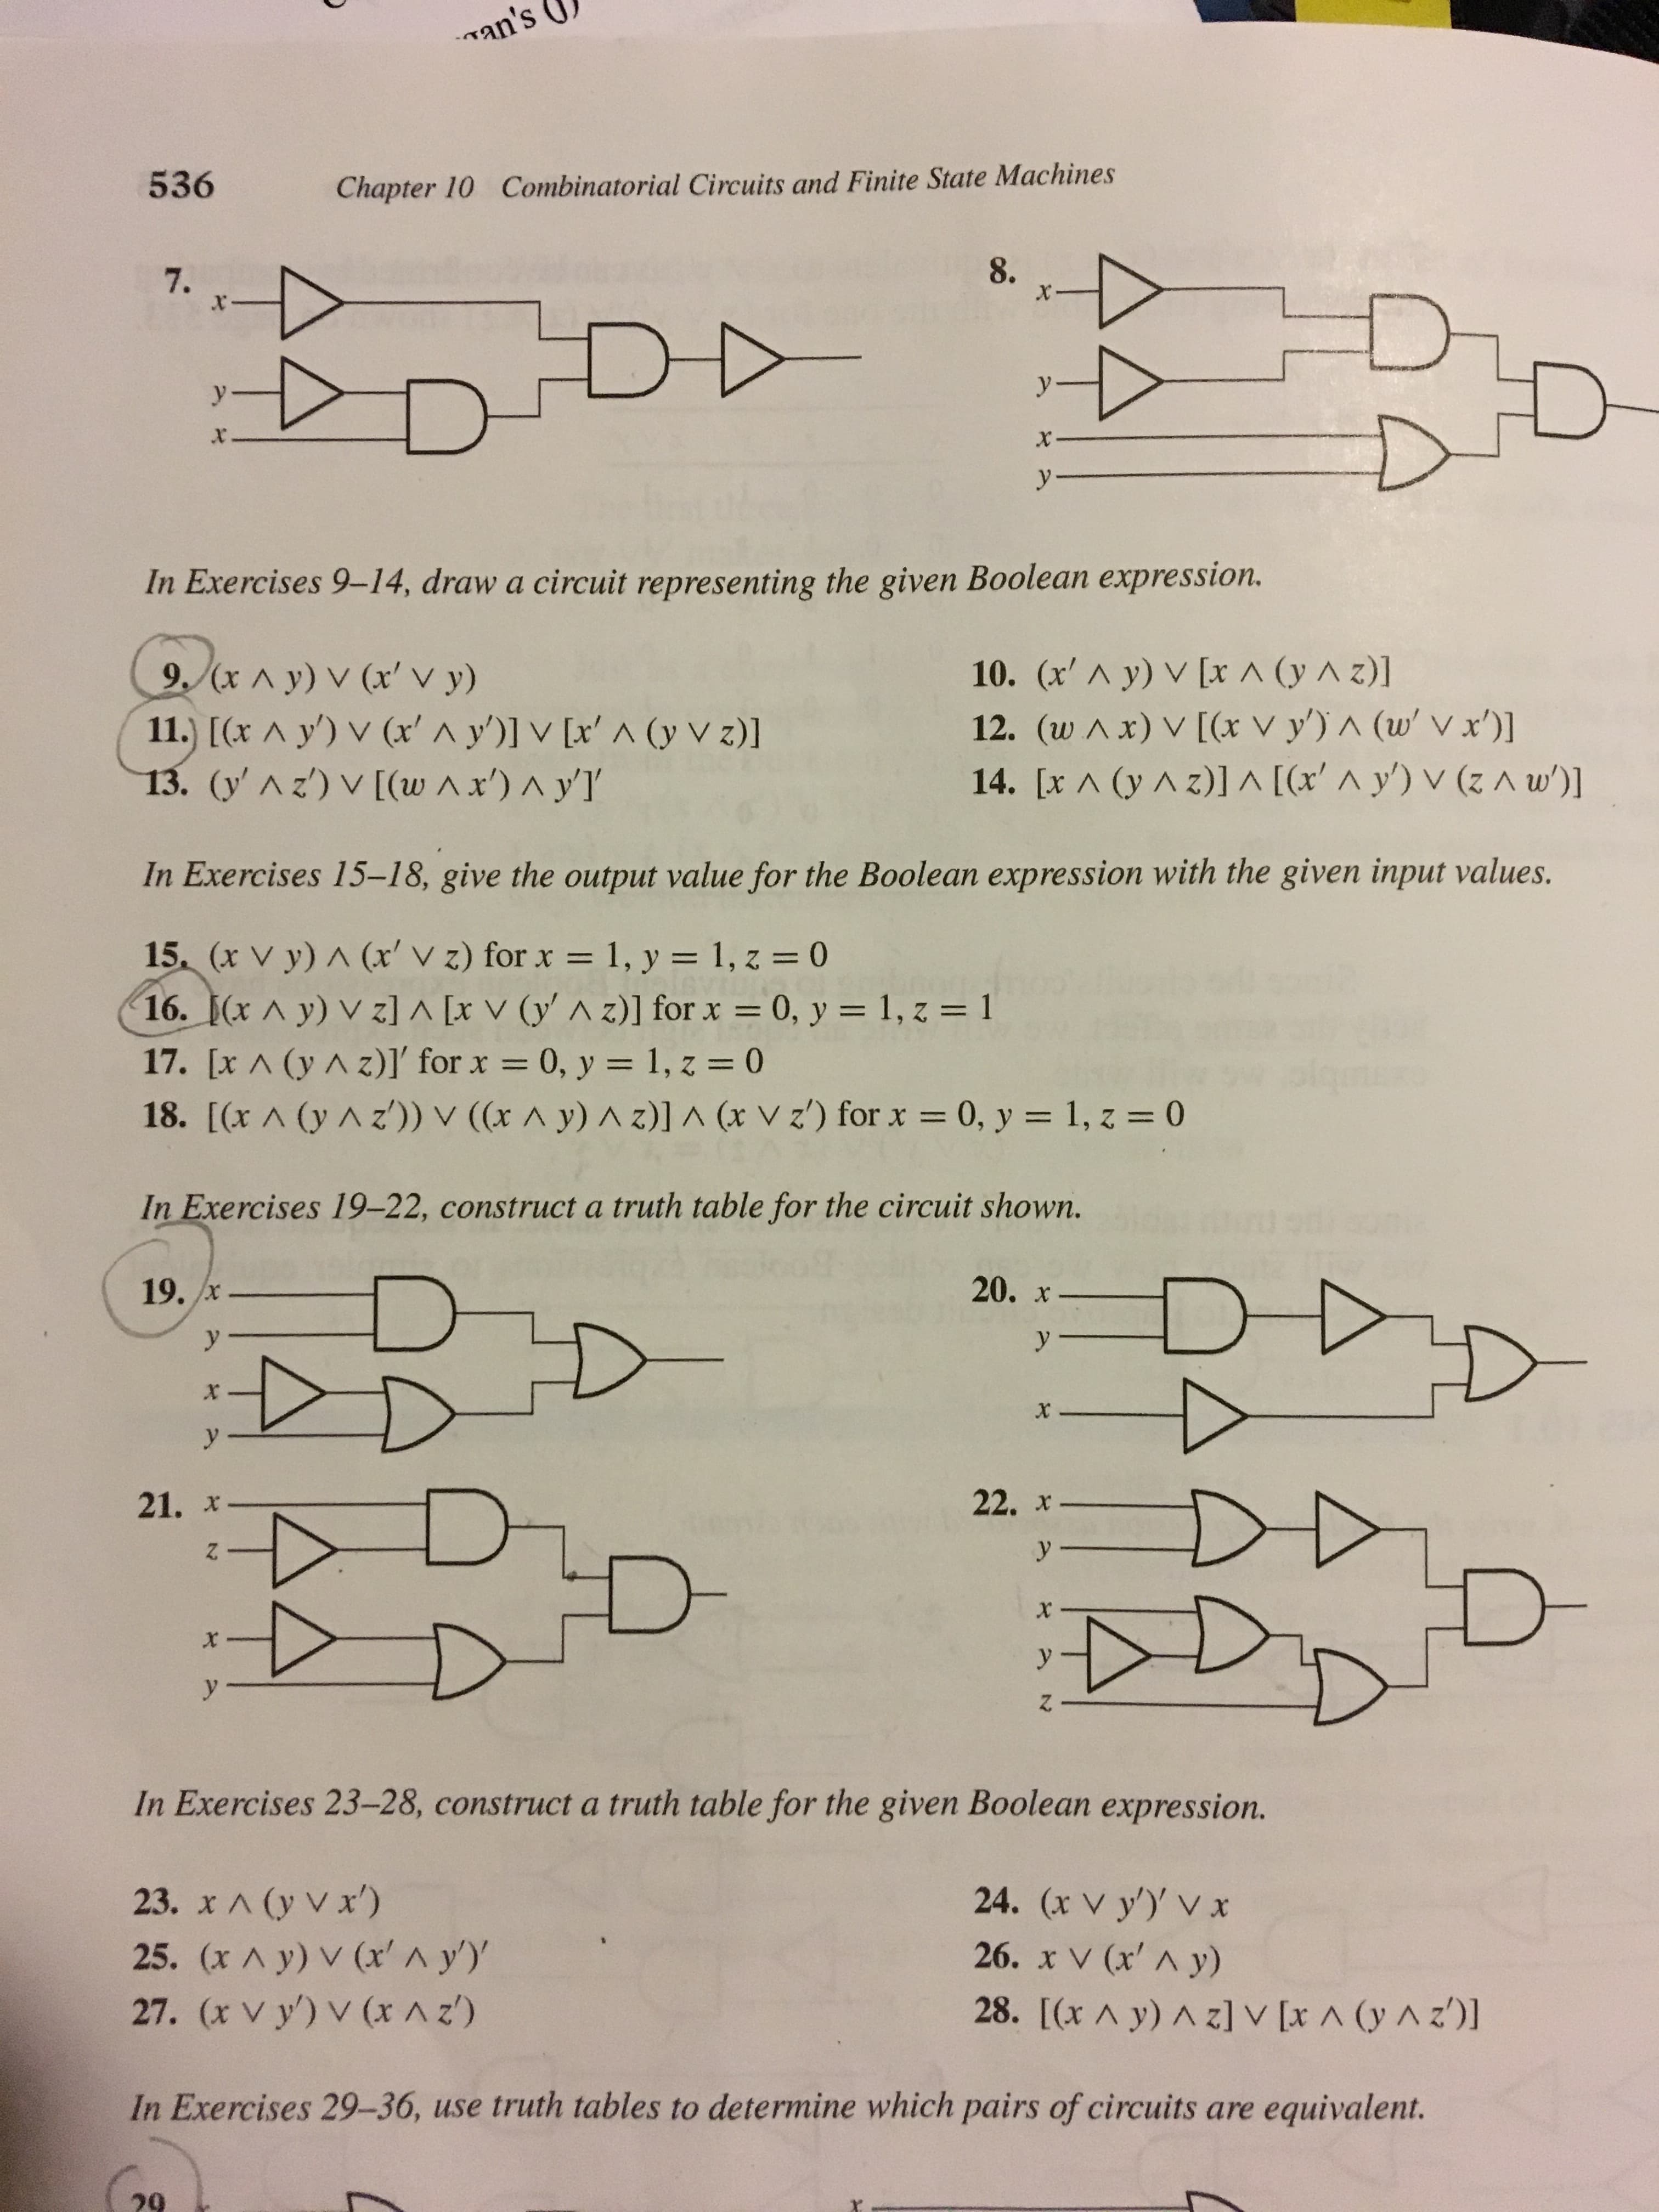 an's
536
Combinatorial Circuits and Finite State Machines
Chapter 10
8.
7.
x
y
X
y
In Exercises 9-14, draw a circuit representing the given Boolean expression.
10. (x'A y) V [x A (y A z)]
12. (w Ax) V [(x V y') A (w Vx')
14. [x A (y Az)] A [(x' A y') V (z A w)
9.(xA y) V (x' V y)
11.) [(x A y') v (x' ^ y')] V [x' A (y v z)]
13. (y'Az)V[(w Ax') ^ y'l
In Exercises 15-1 8, give the output value for the Boolean expression with the given input values.
15, (x V y) A (x' V z) for x 1, y = 1, z = 0
16. (x A y) V z] ^ [x V (y' ^ z)] for x = 0, y = 1, z = 1
17. [x A (yAz)]' for x 0, y 1, z = 0
18. [(x A (y Az)) V ((x A y) A z)] ^ (x vz') for x 0, y = 1, z = 0
qm: o
-
In Exercises 19-22, construct a truth table for the circuit shown.
20. x
19. x
y
у
X
y
22. x
21. х
y-
x
X
y
y
In Exercises 23-28, construct a truth table for the given Boolean expression.
23. x A (y V x')
25. (x A y) V (x^ y)
27. (x v y) v (x A z)
24. (x V y) V x
26. x V (x' A y)
28. [(x A y) A zl v [x A (y A z')]
In Exercises 29-36, use truth tables to determine which pairs of circuits are equivalent.
29
수수
AA
